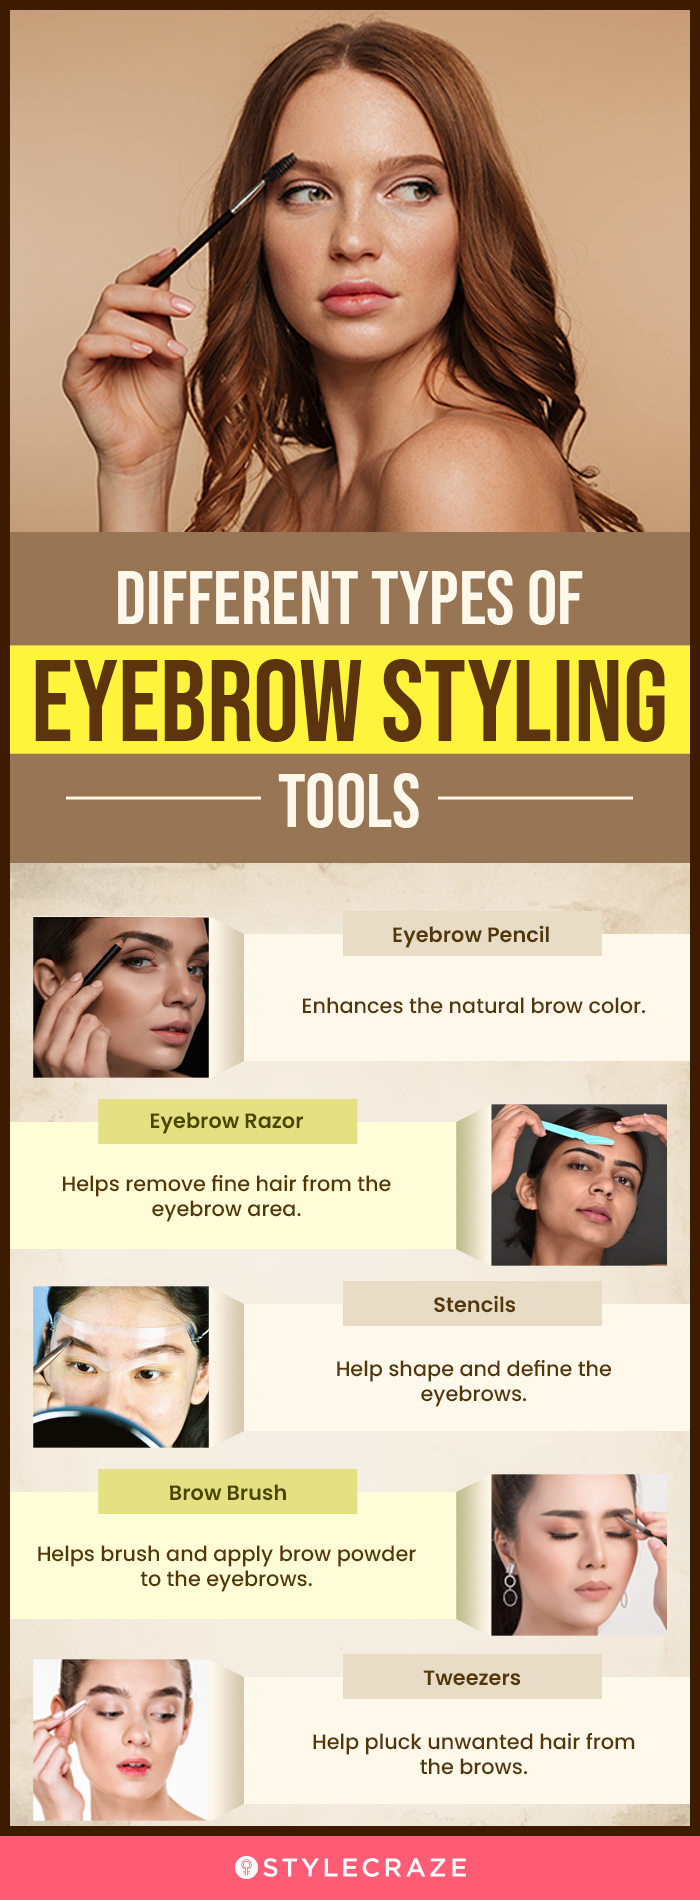 different types of eyebrow styling tools (infographic)